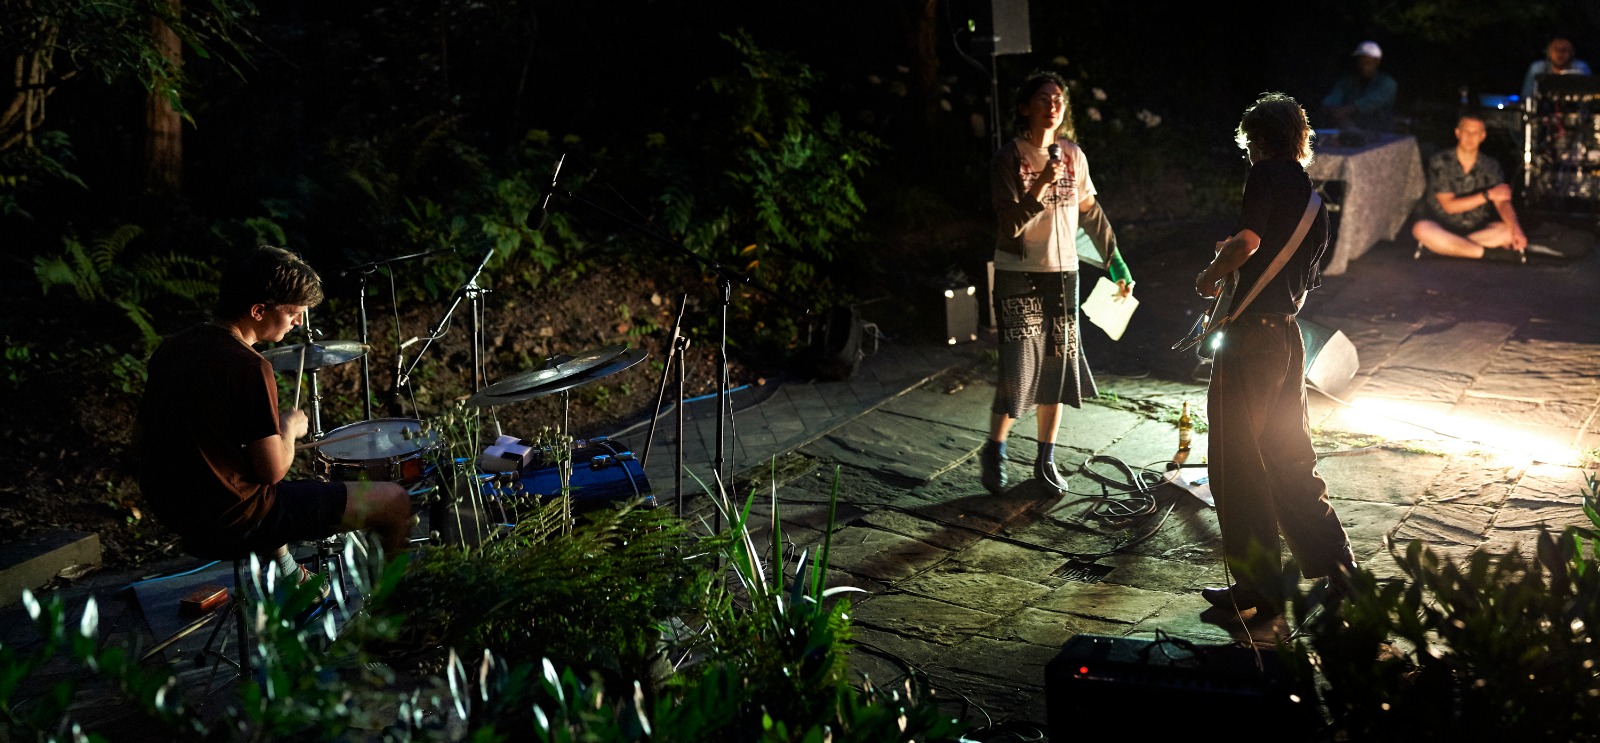 in a dark garden, a three-piece band of a guitar, drums, and a vocalist perform under a spotlight.